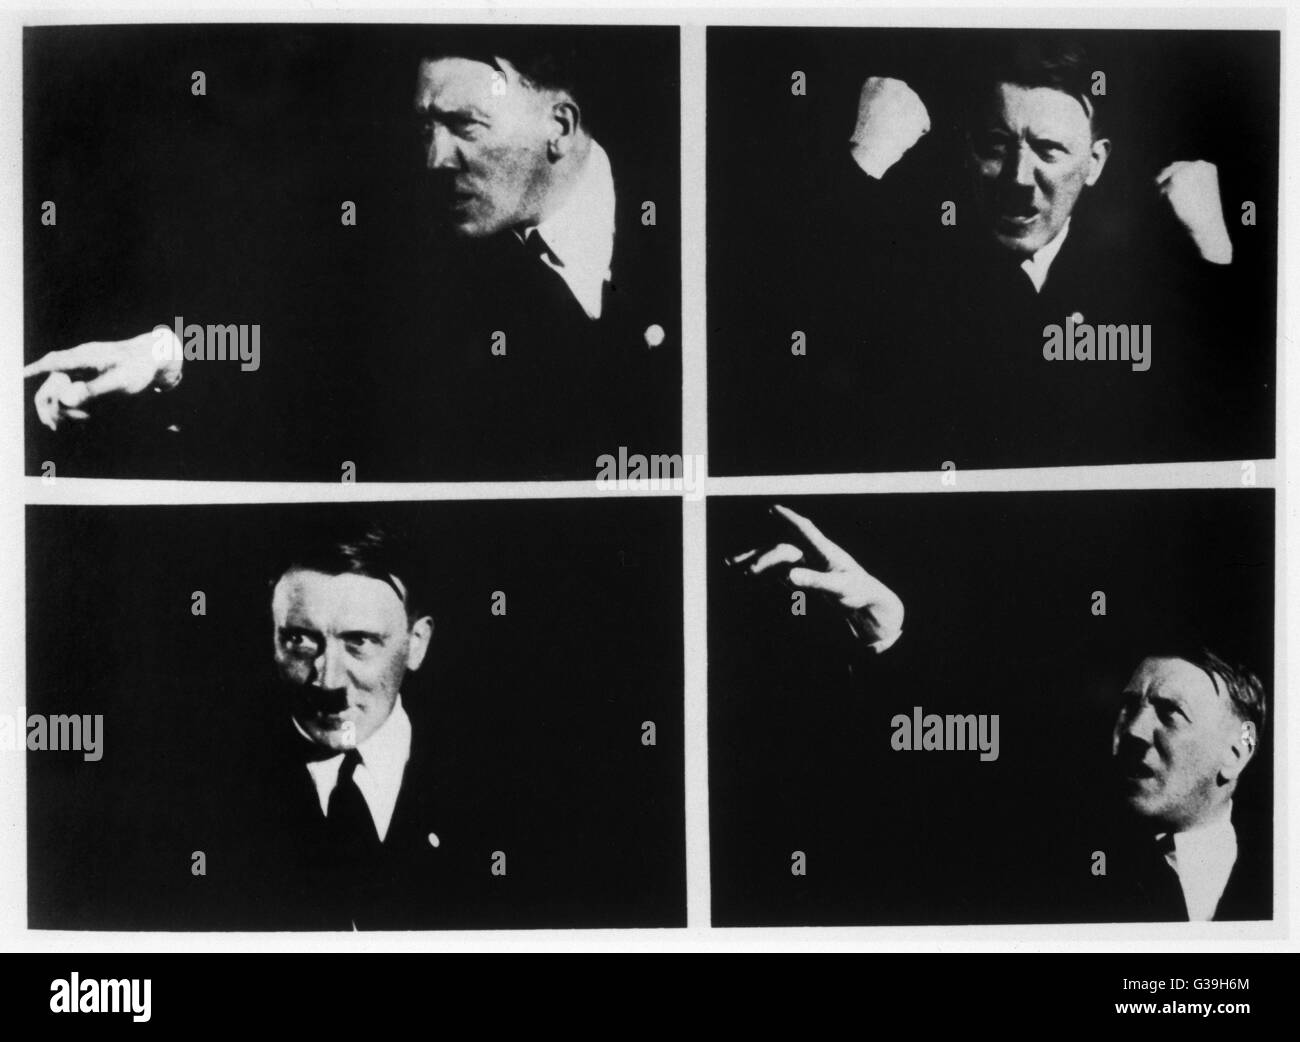 German dictator, Adolf Hitler, photographed in various poses as he while practising his speech making techniques      Date: circa 1925 Stock Photo